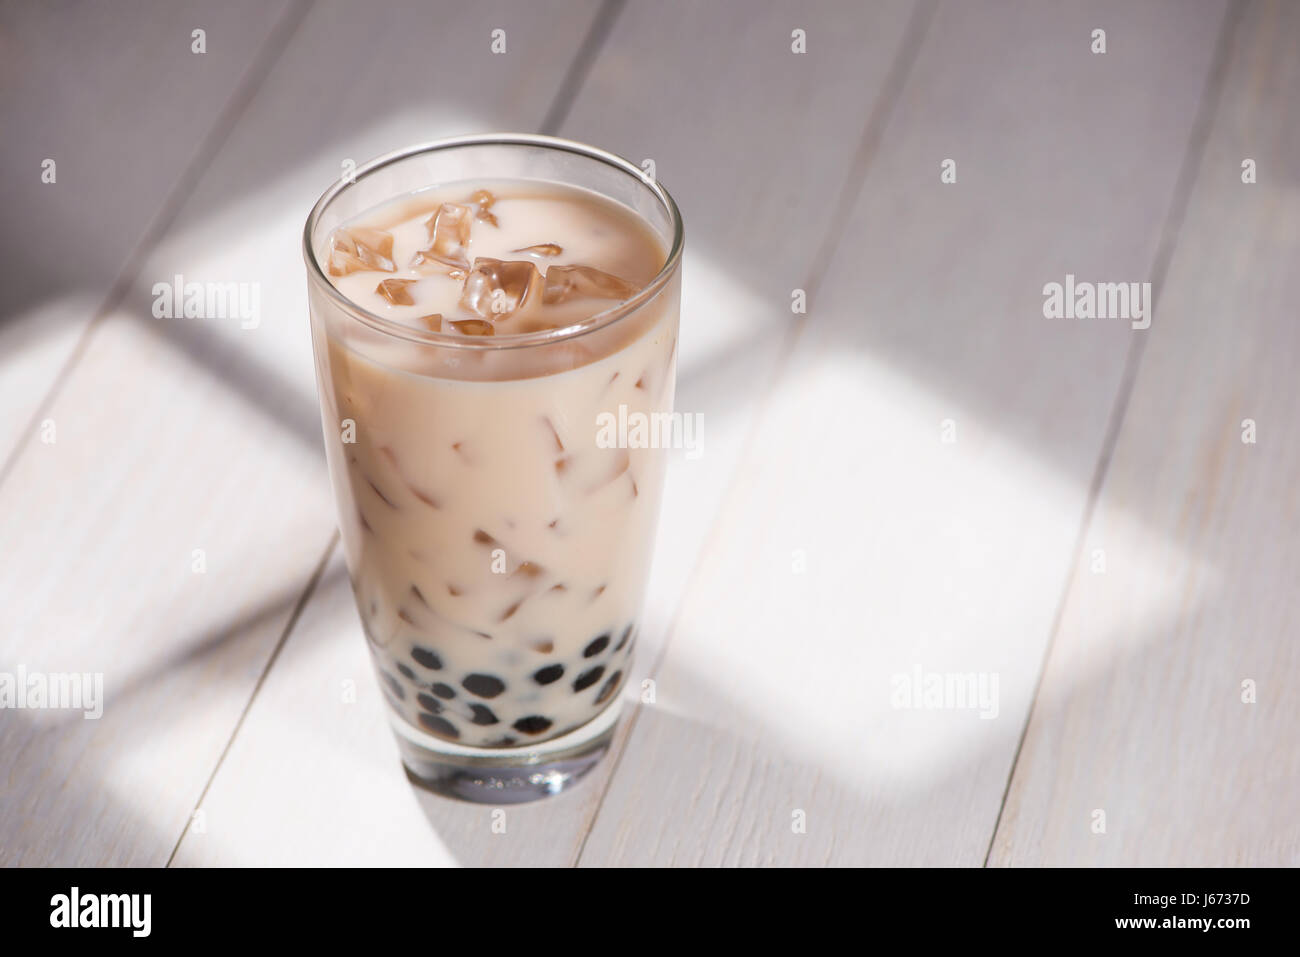 Boba / Bubble tea. Homemade Milk Tea with Pearls on wooden table. Stock Photo